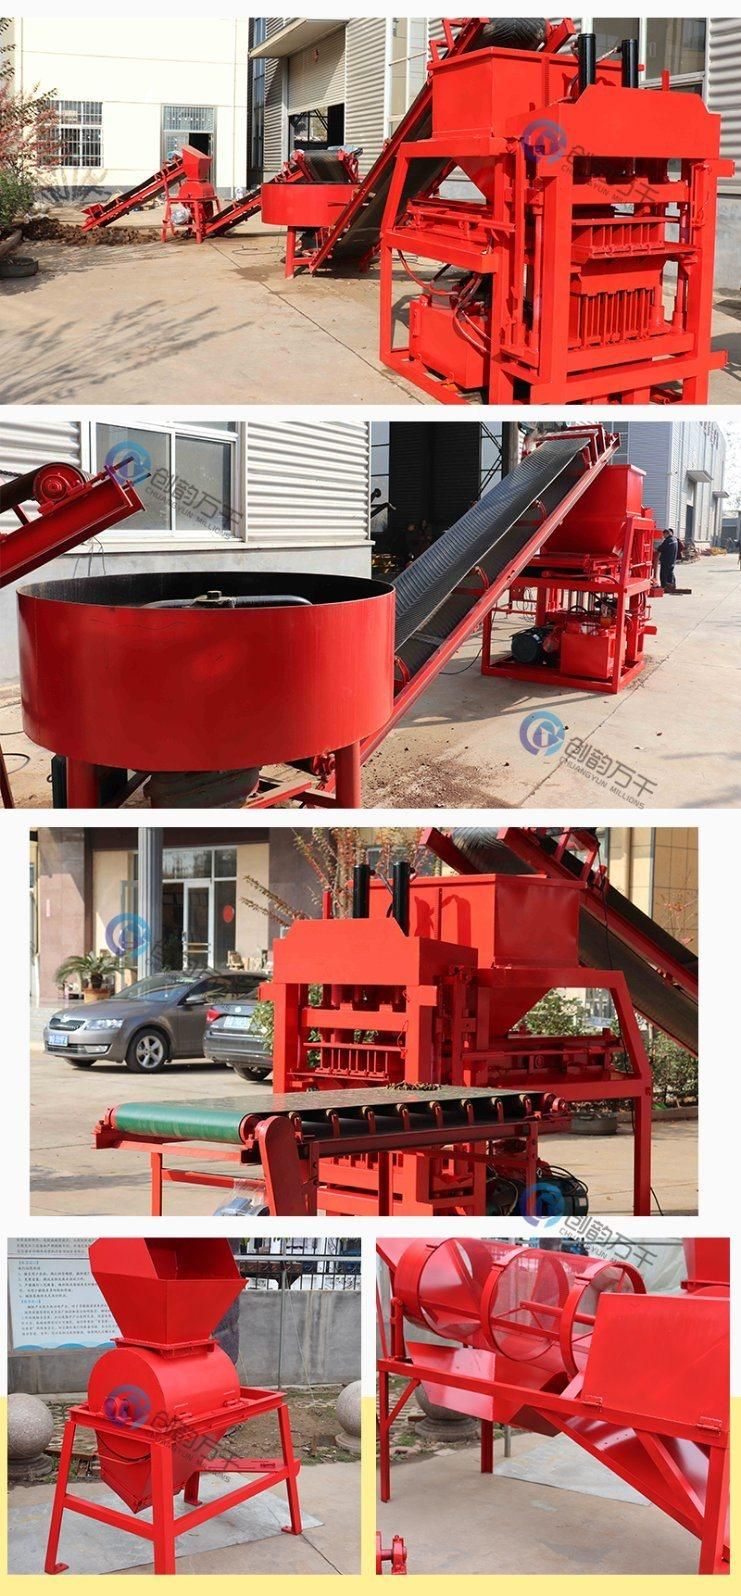 Cy4-10 Automatic Soil Cement Brick Making Machine with Hydraulic System for Sale